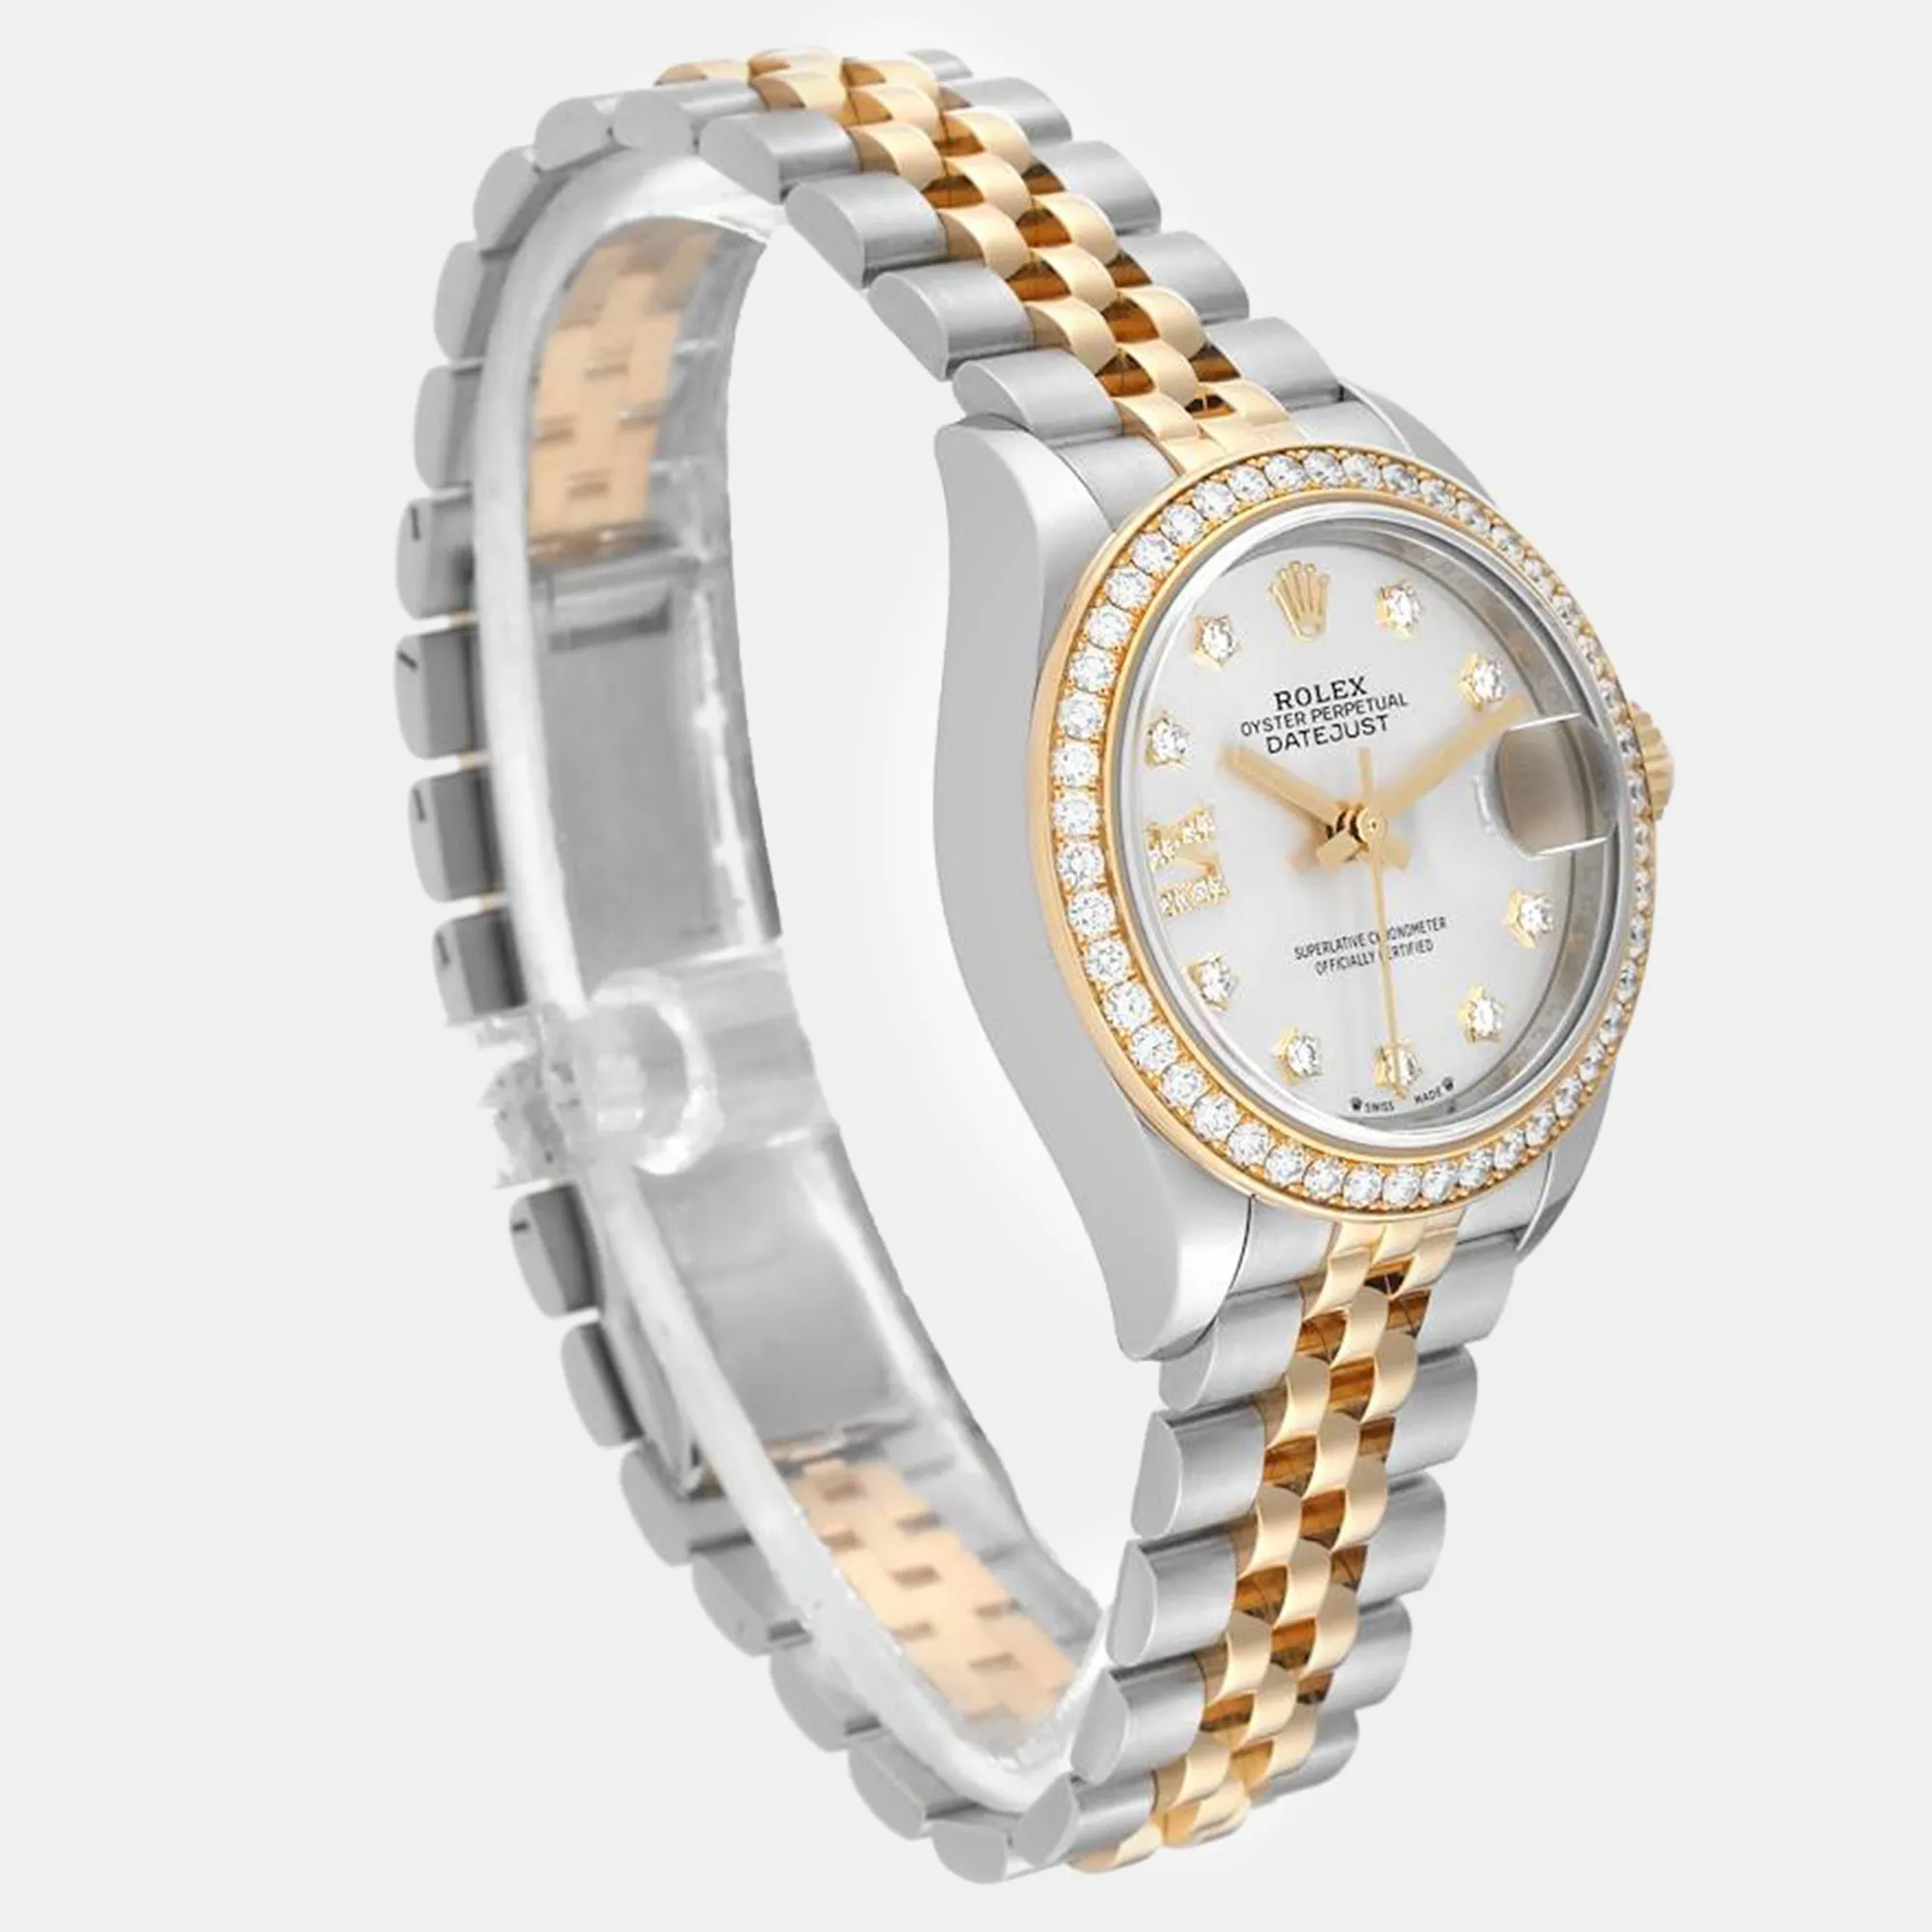 Rolex Datejust 28mm Yellow gold and stainless steel 4